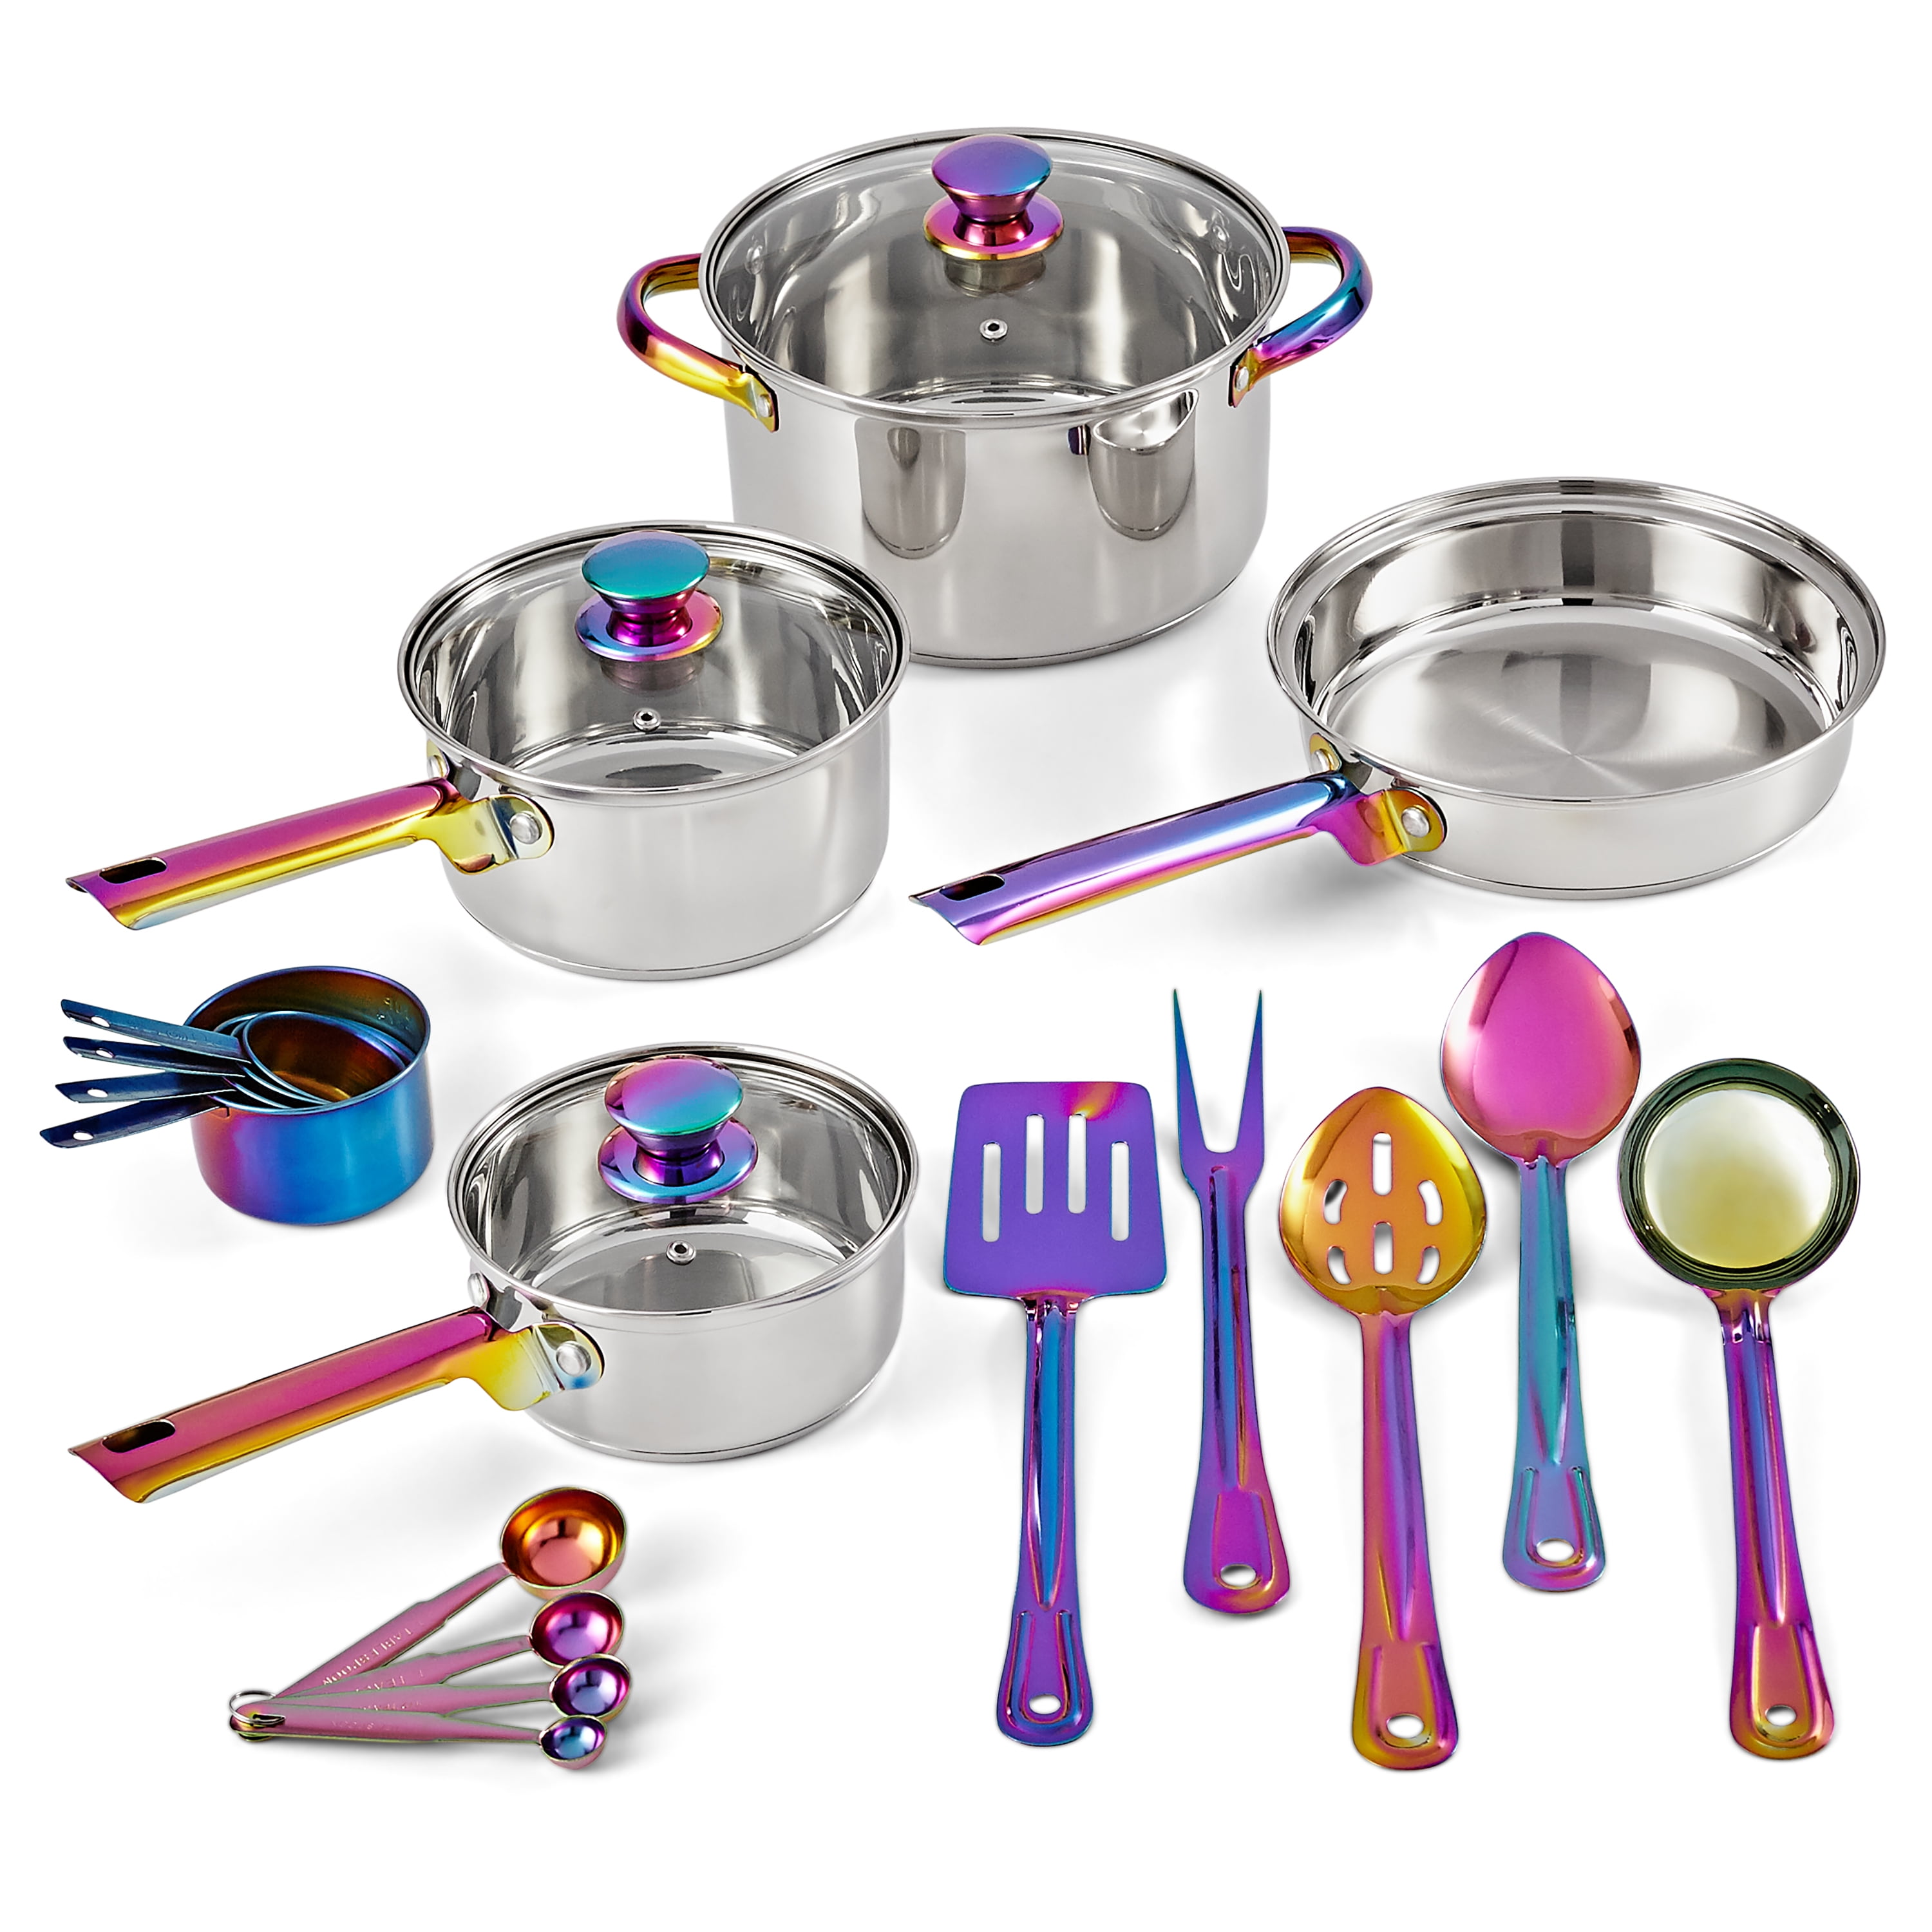 LEXI HOME 8 Piece Multi-Purpose Stainless Steel Kitchen Tool Set